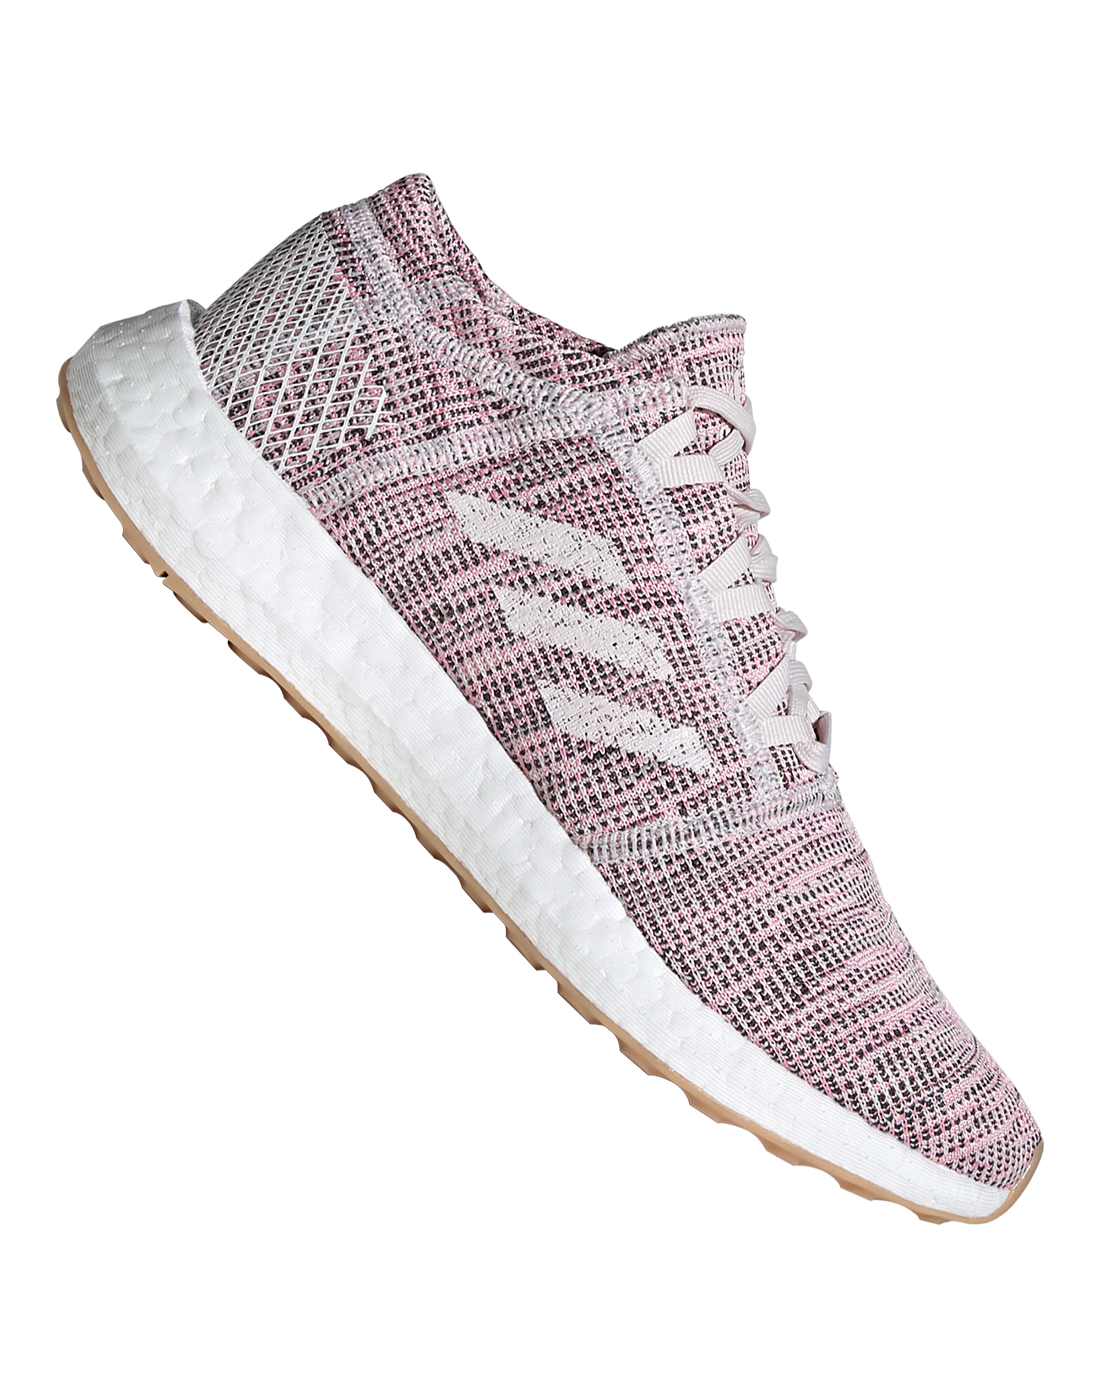 womens pureboost go shoes